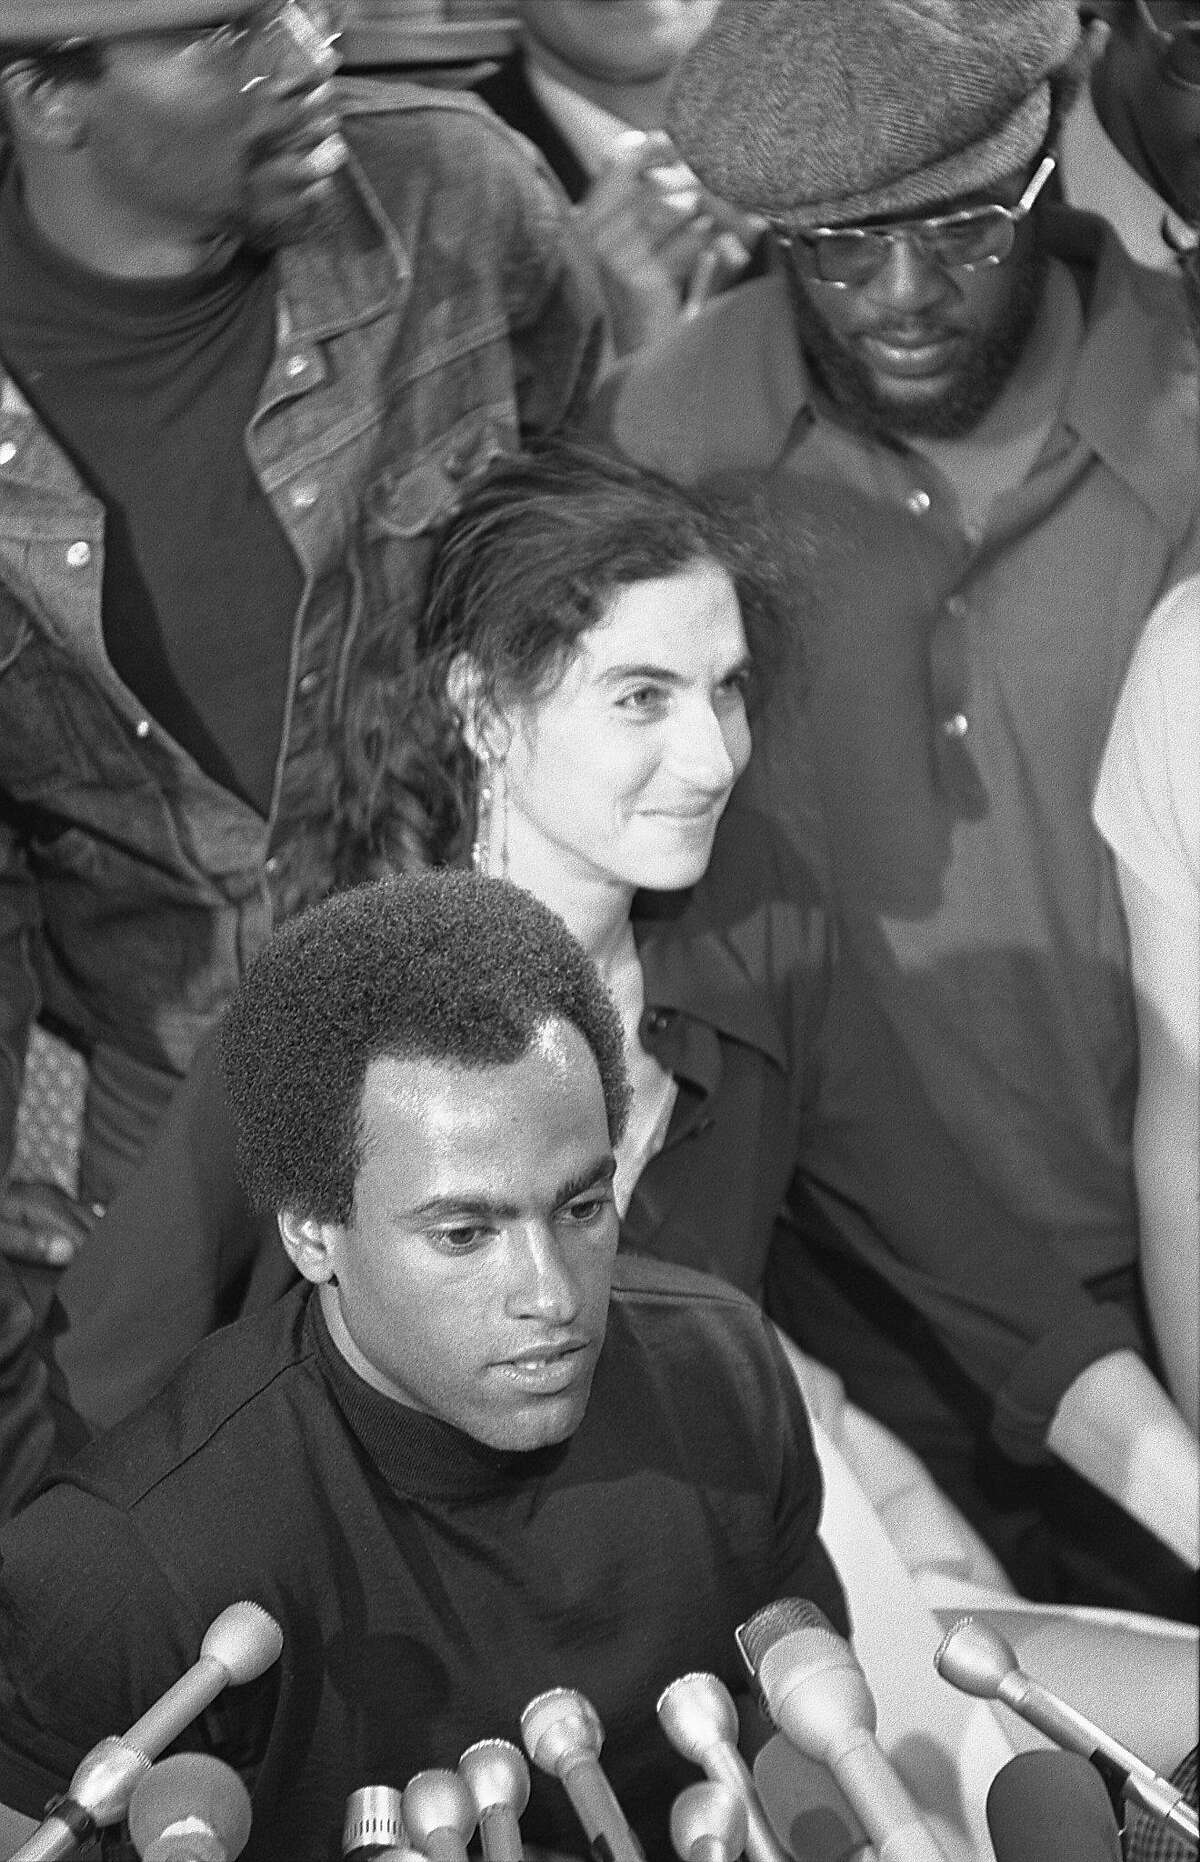 Black Panther Huey Newton with his lawyer, Fay Stender, in San Francisco at Charles Garry's office, August 5, 1970 the day he was released from prison